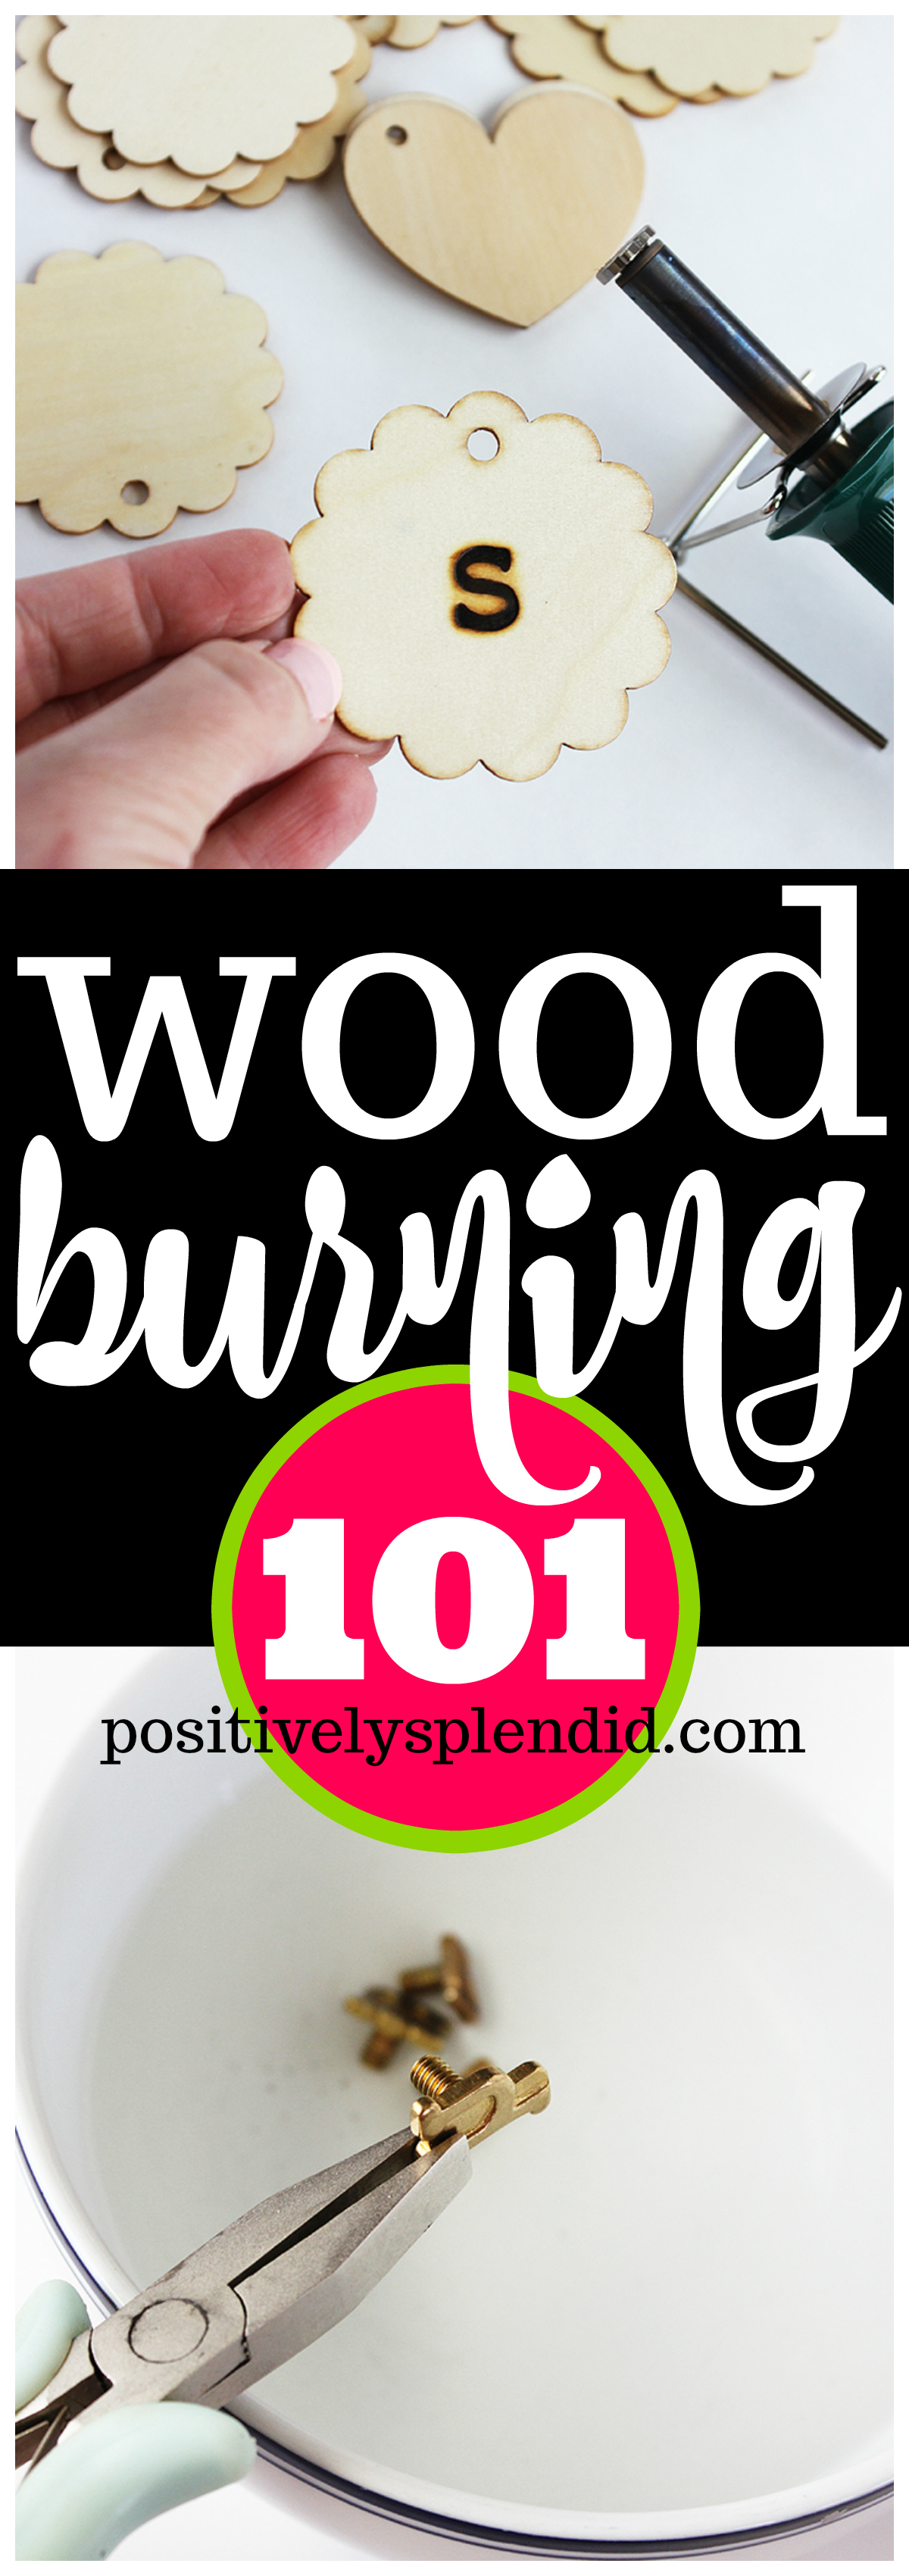 10 Wood Burning Tips and Tricks for Beginners - Positively Splendid {Crafts,  Sewing, Recipes and Home Decor}